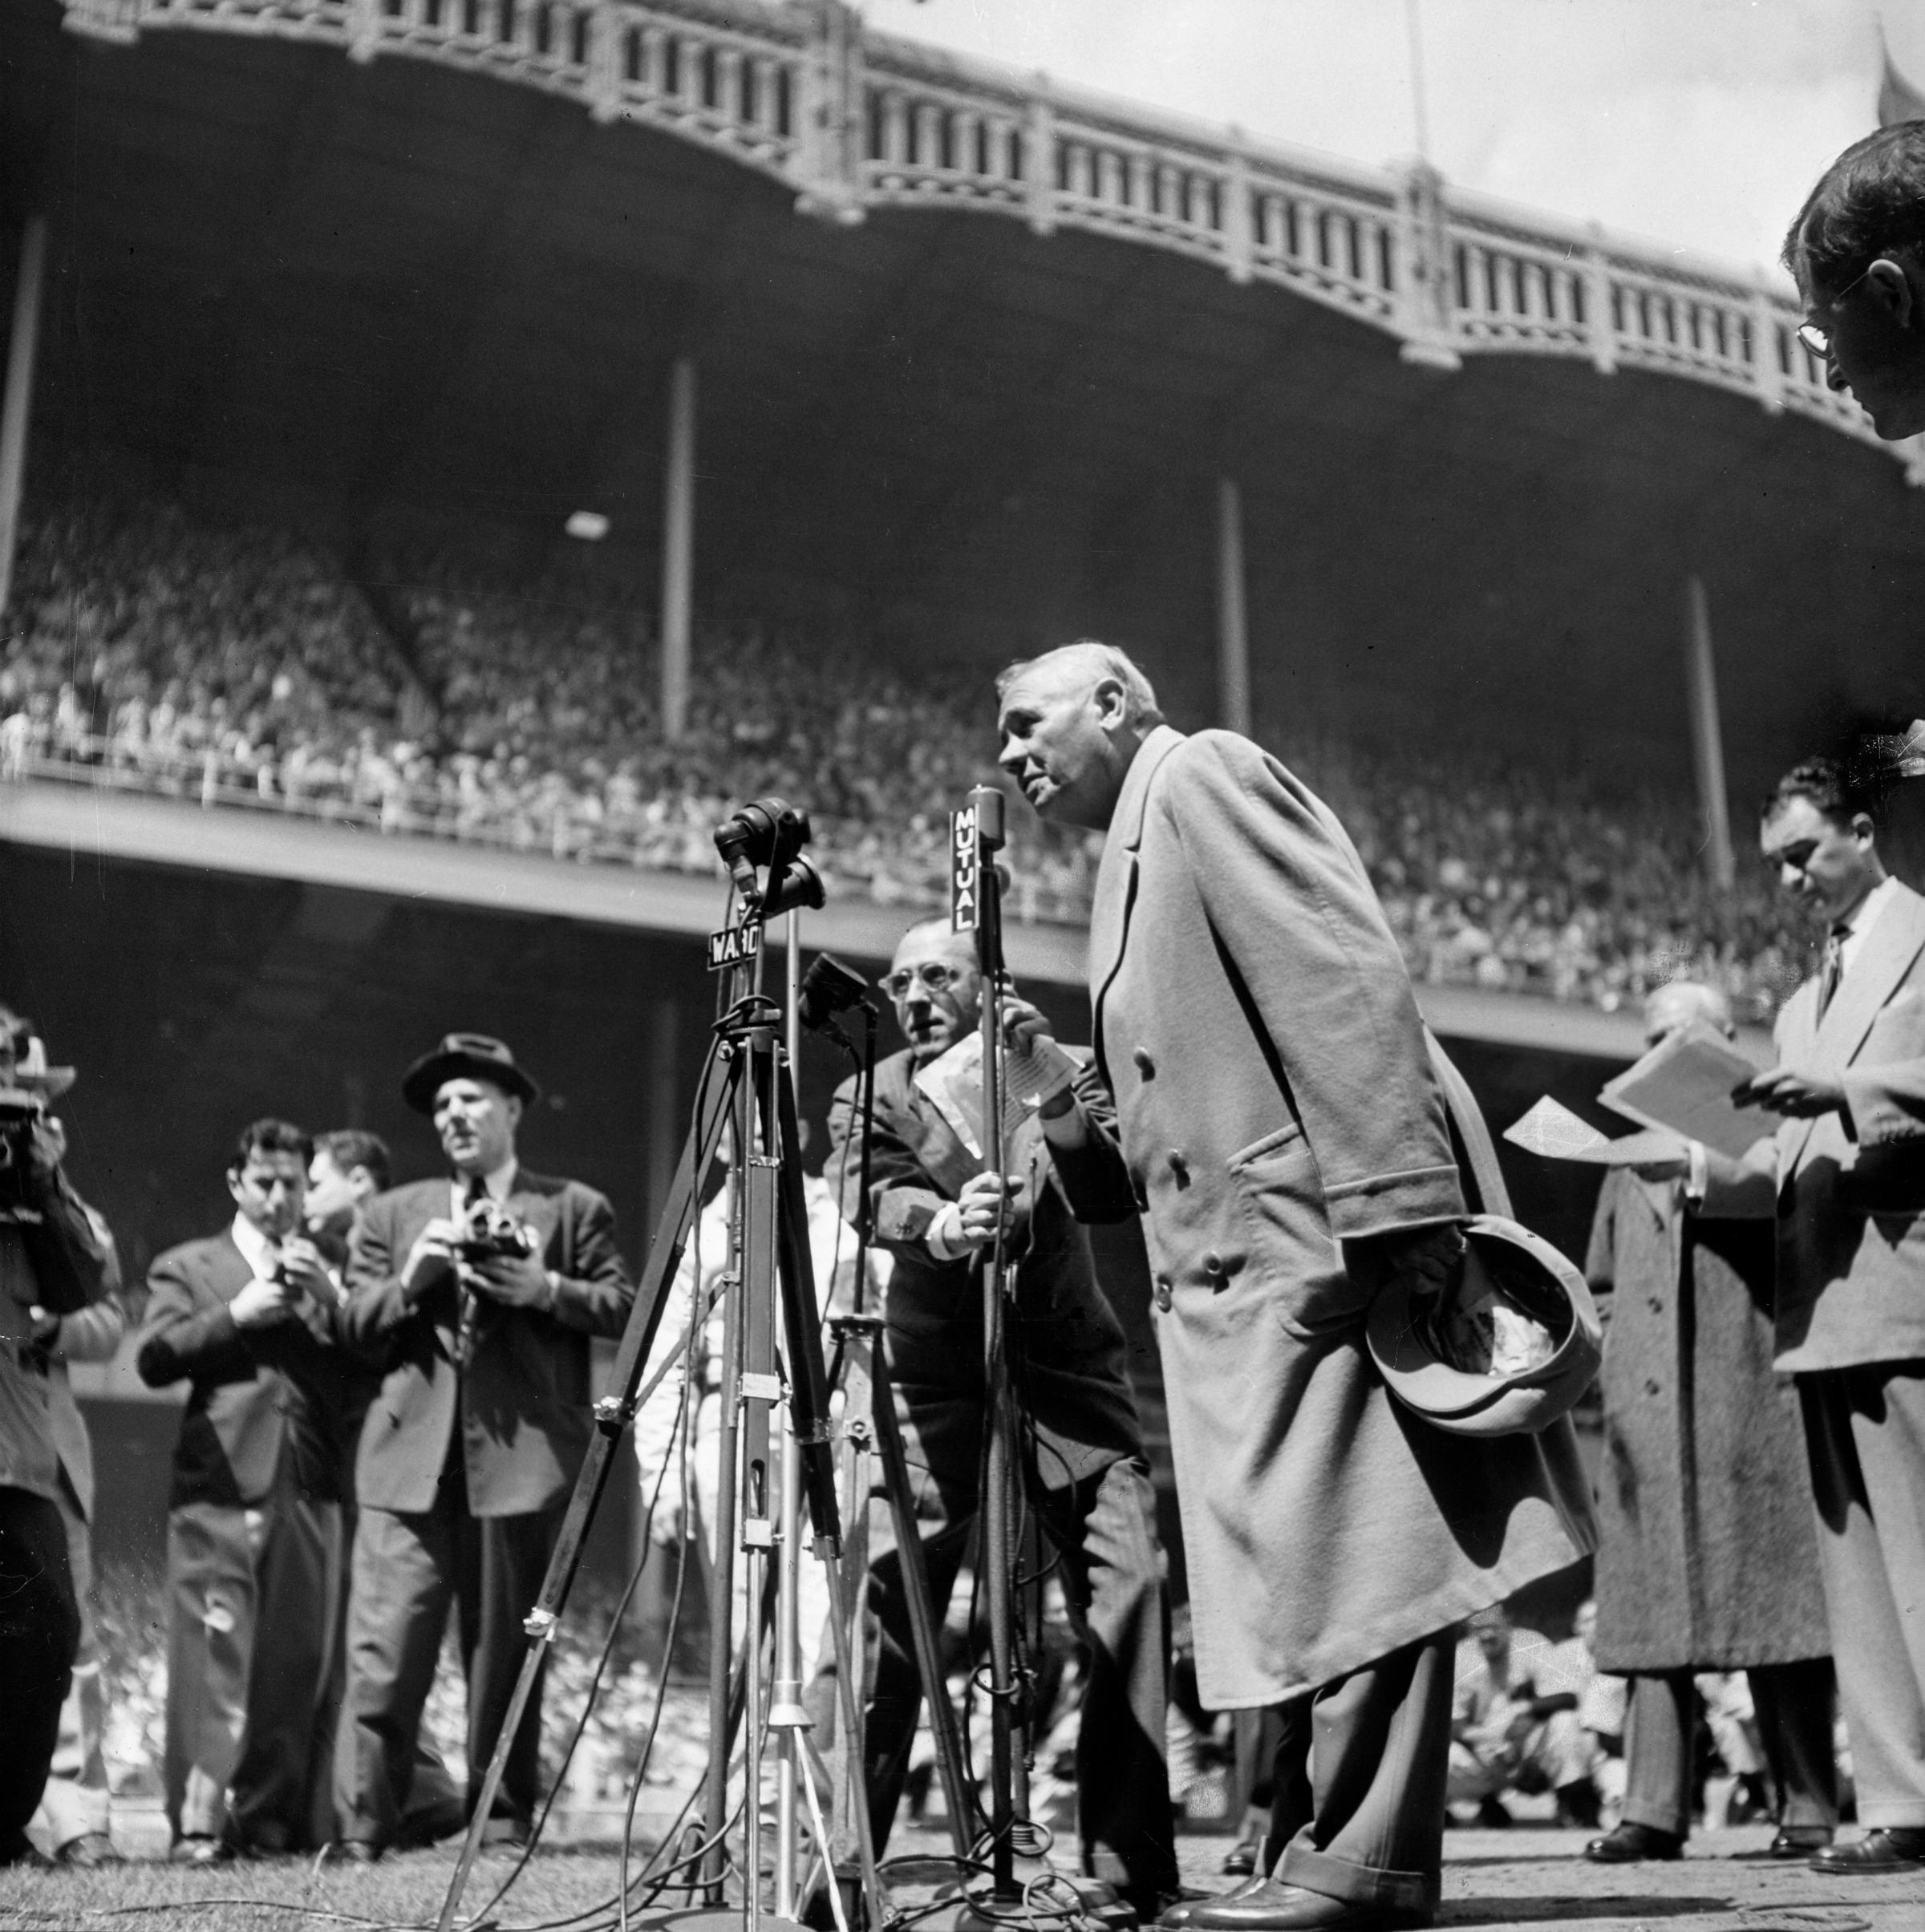 An obviously ailing Babe Ruth thanks the crowd at Yankee Stadium on "Babe Ruth Day," April 27, 1947.